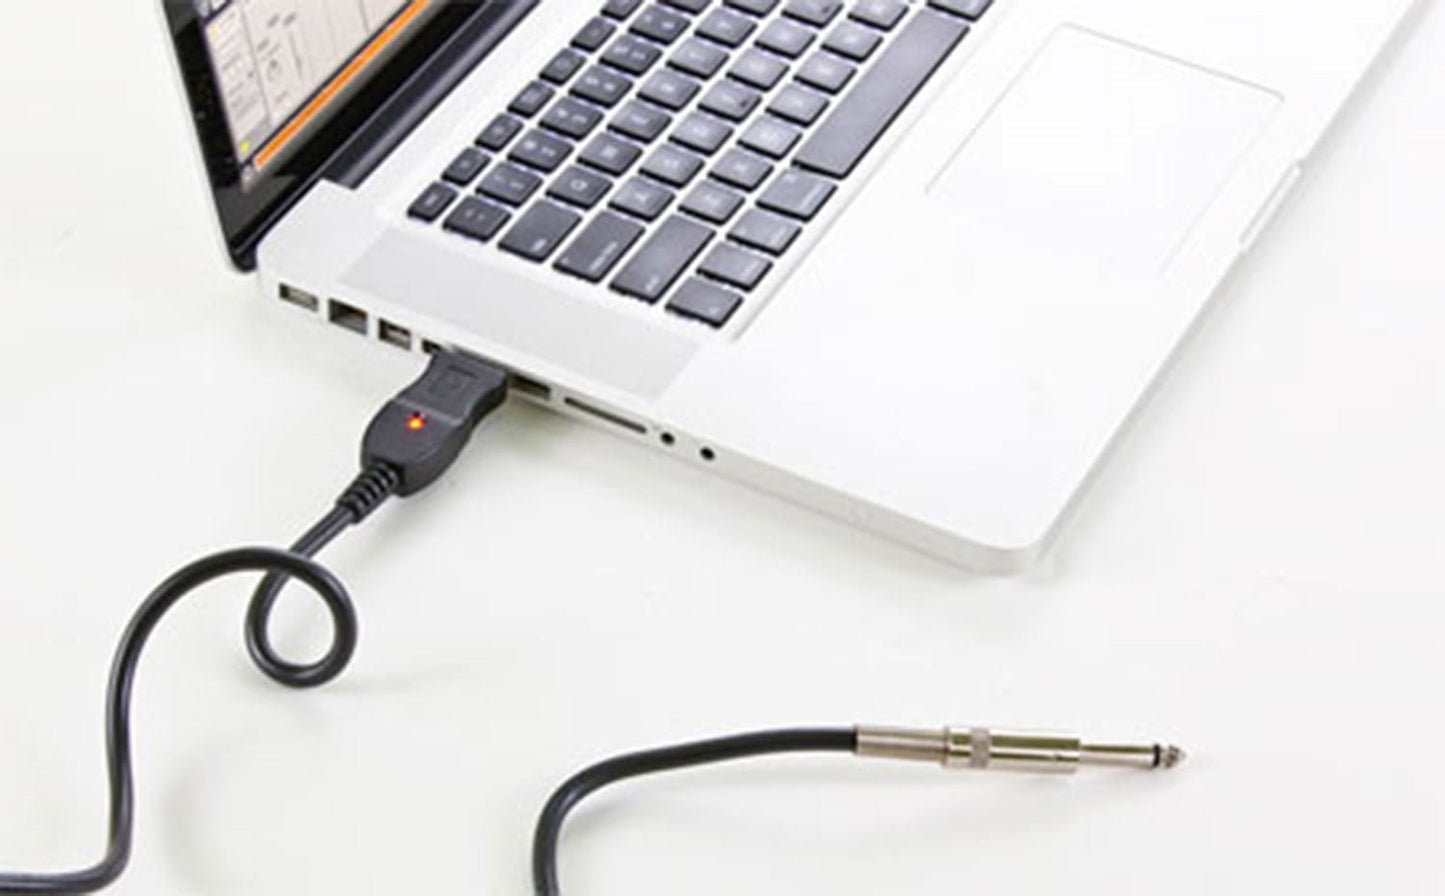 ART TConnect 1/4-Inch to USB Cable - PSSL ProSound and Stage Lighting